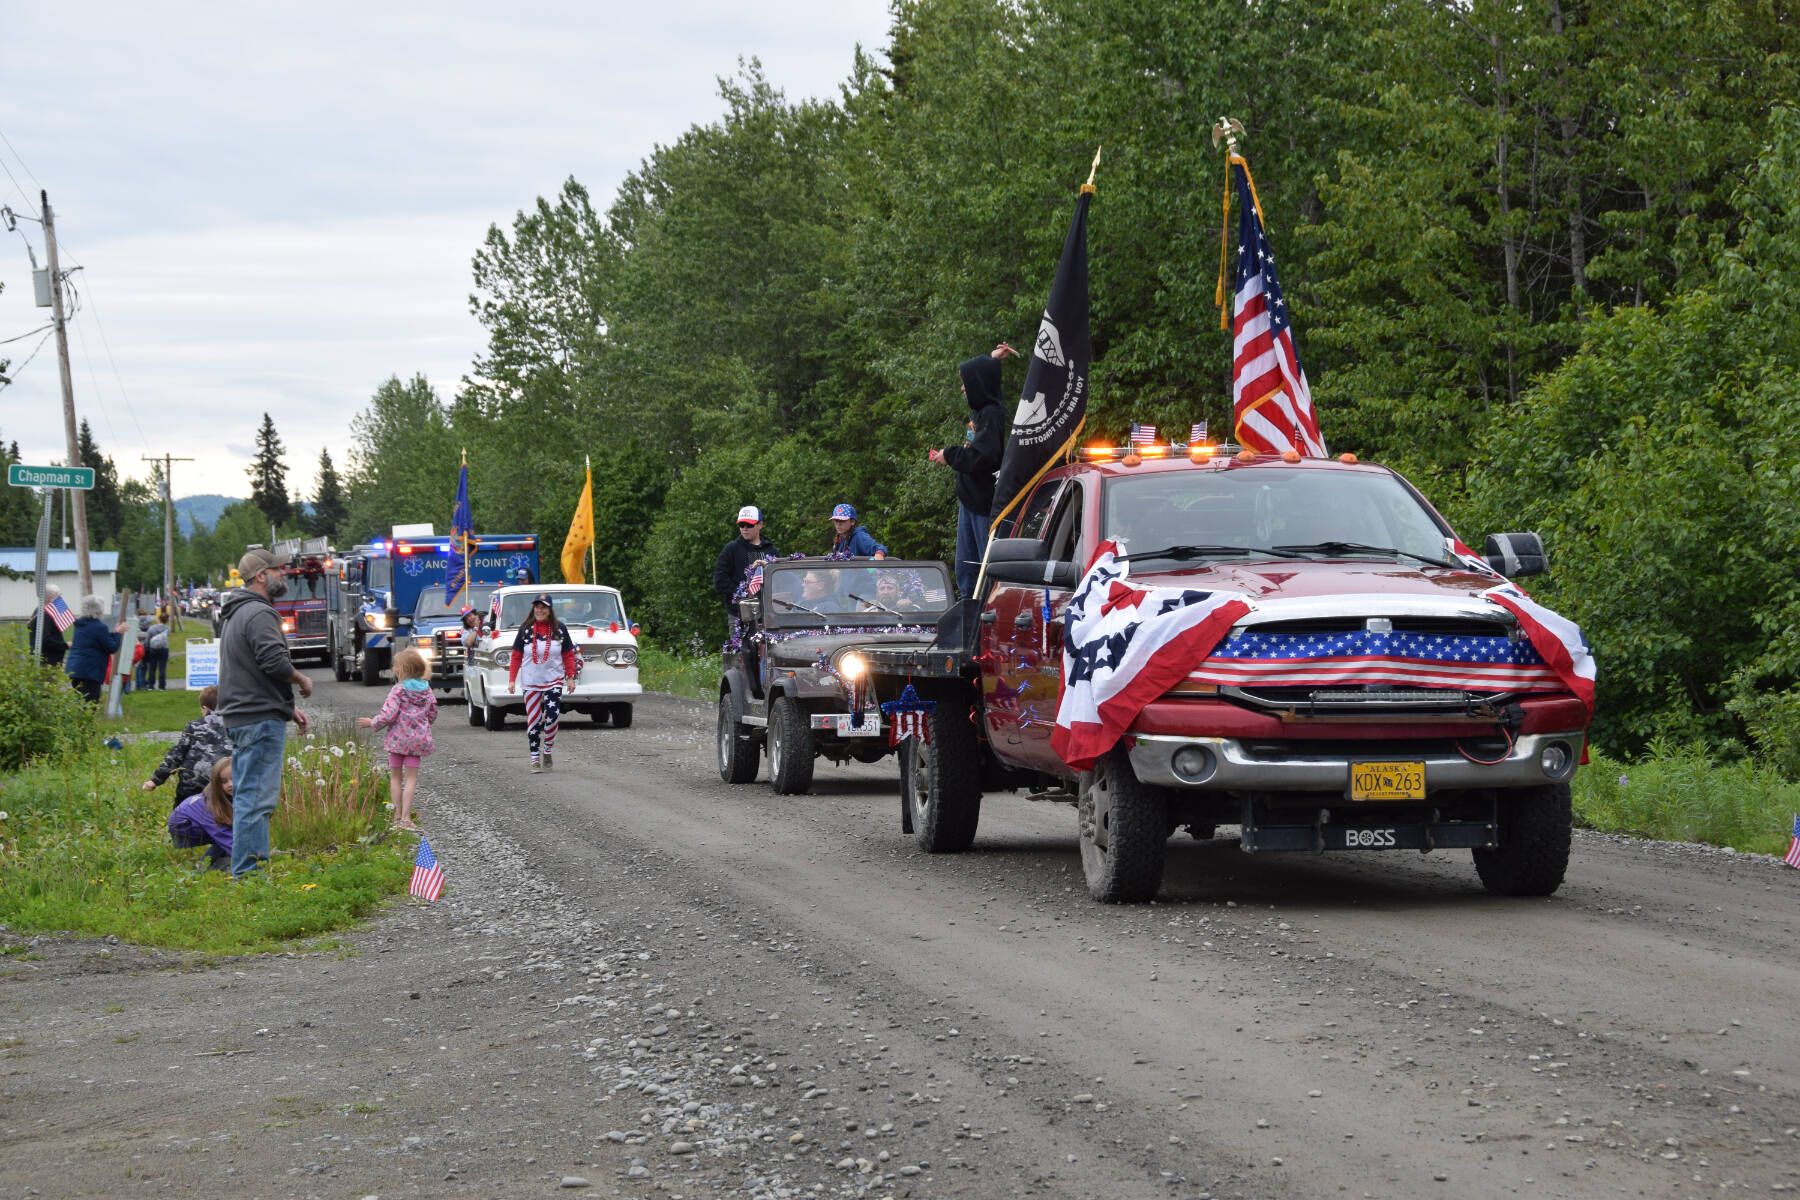 Parade participants toss candy to spectators during the Anchor Point Fourth of July parade on Tuesday, July 4, 2023 in Anchor Point, Alaska. (Delcenia Cosman/Homer News)